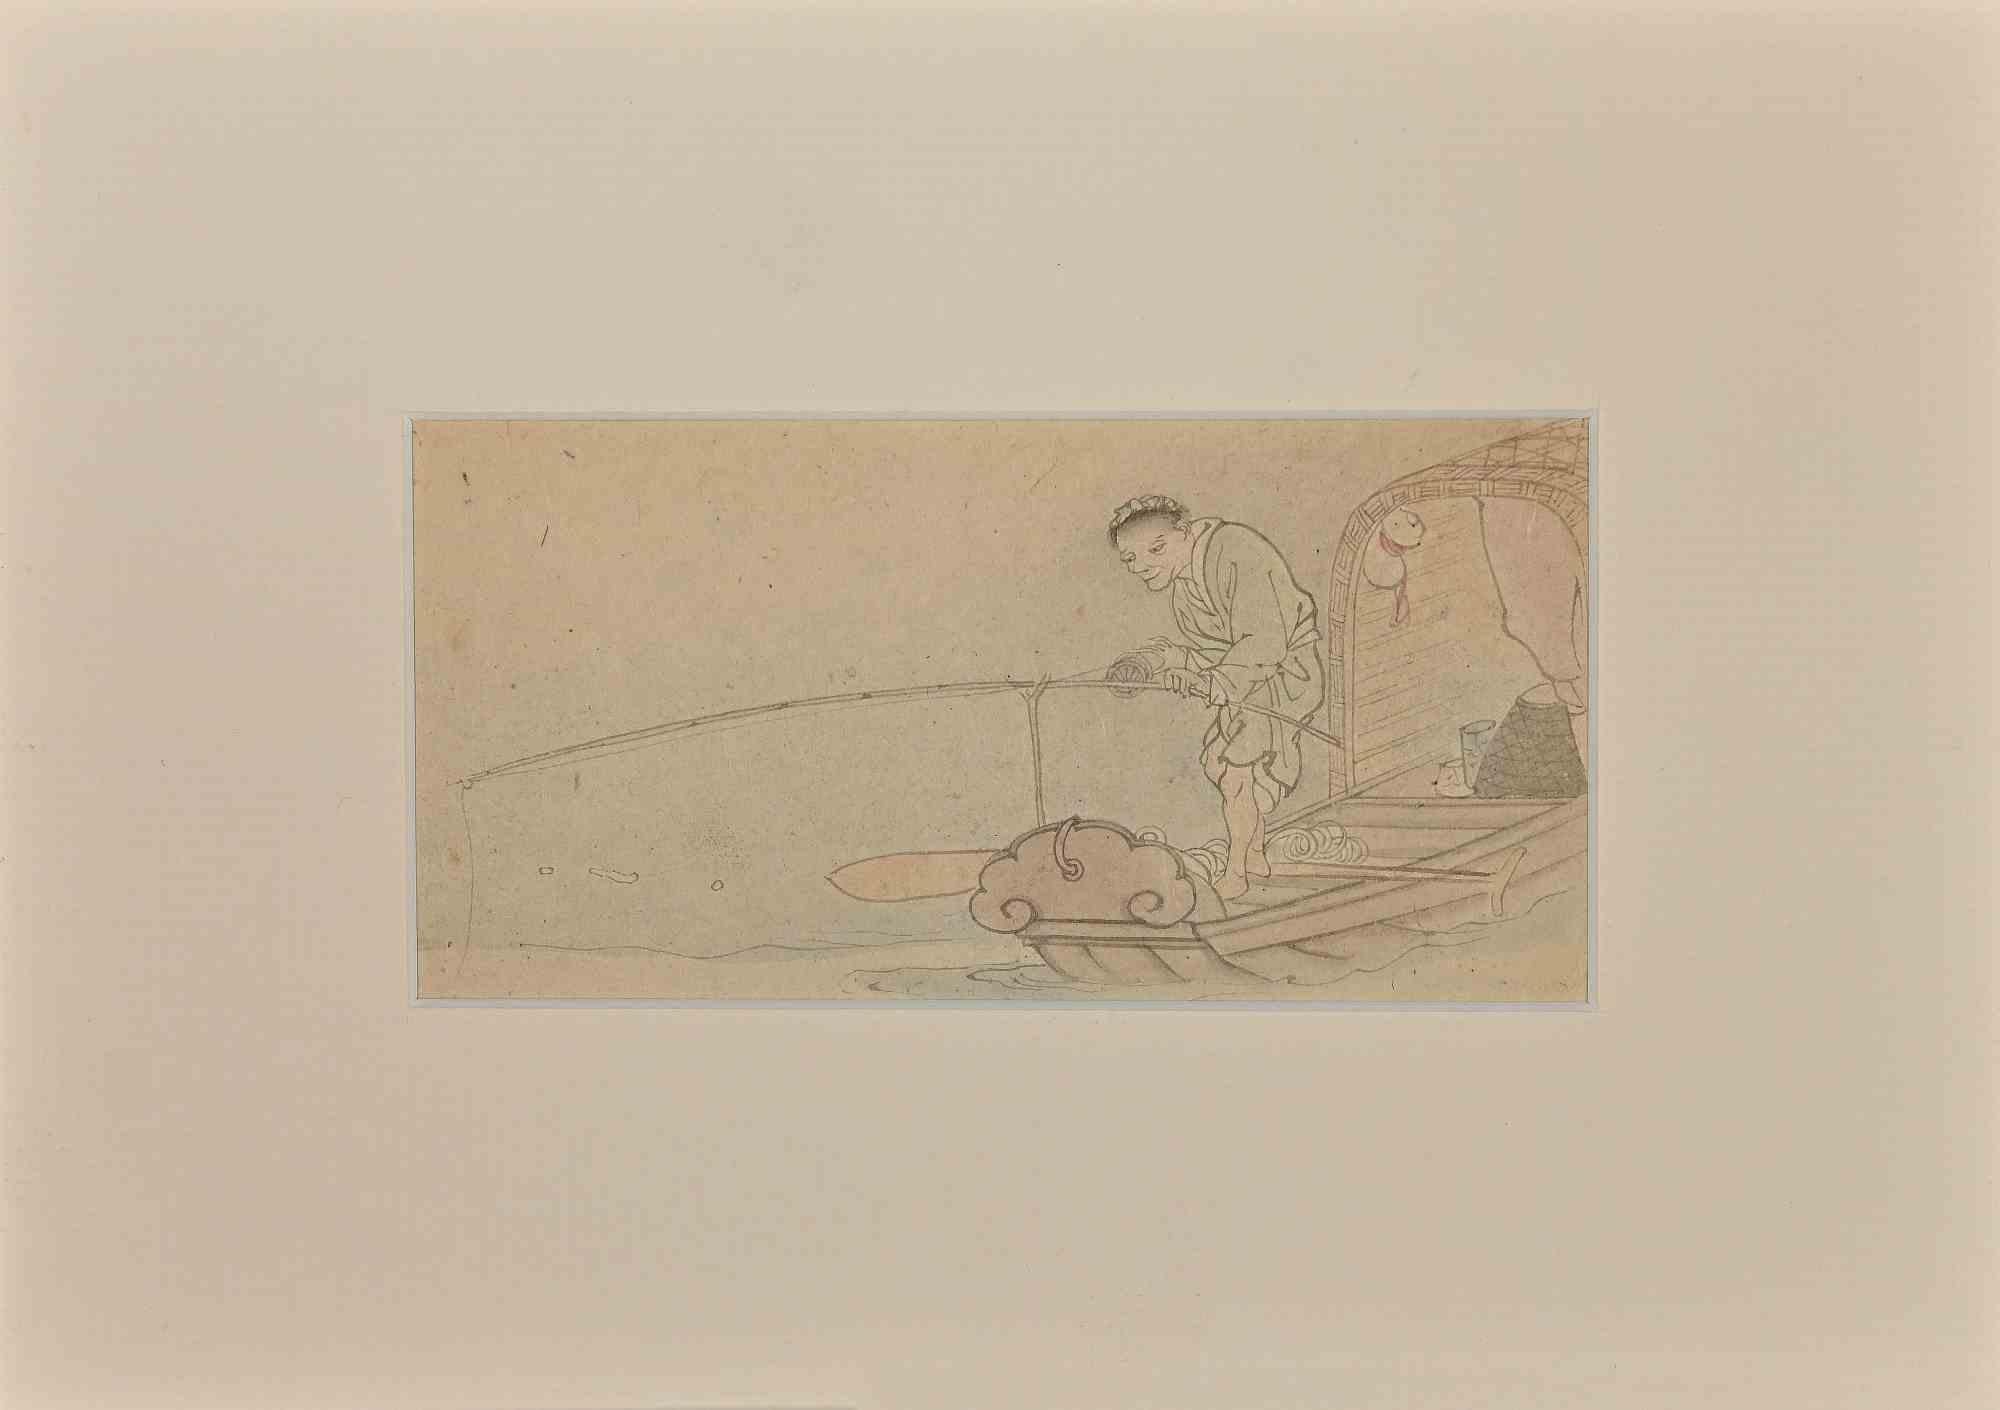 Fisherman - Drawing in Ink and Watercolor - Early 20th century